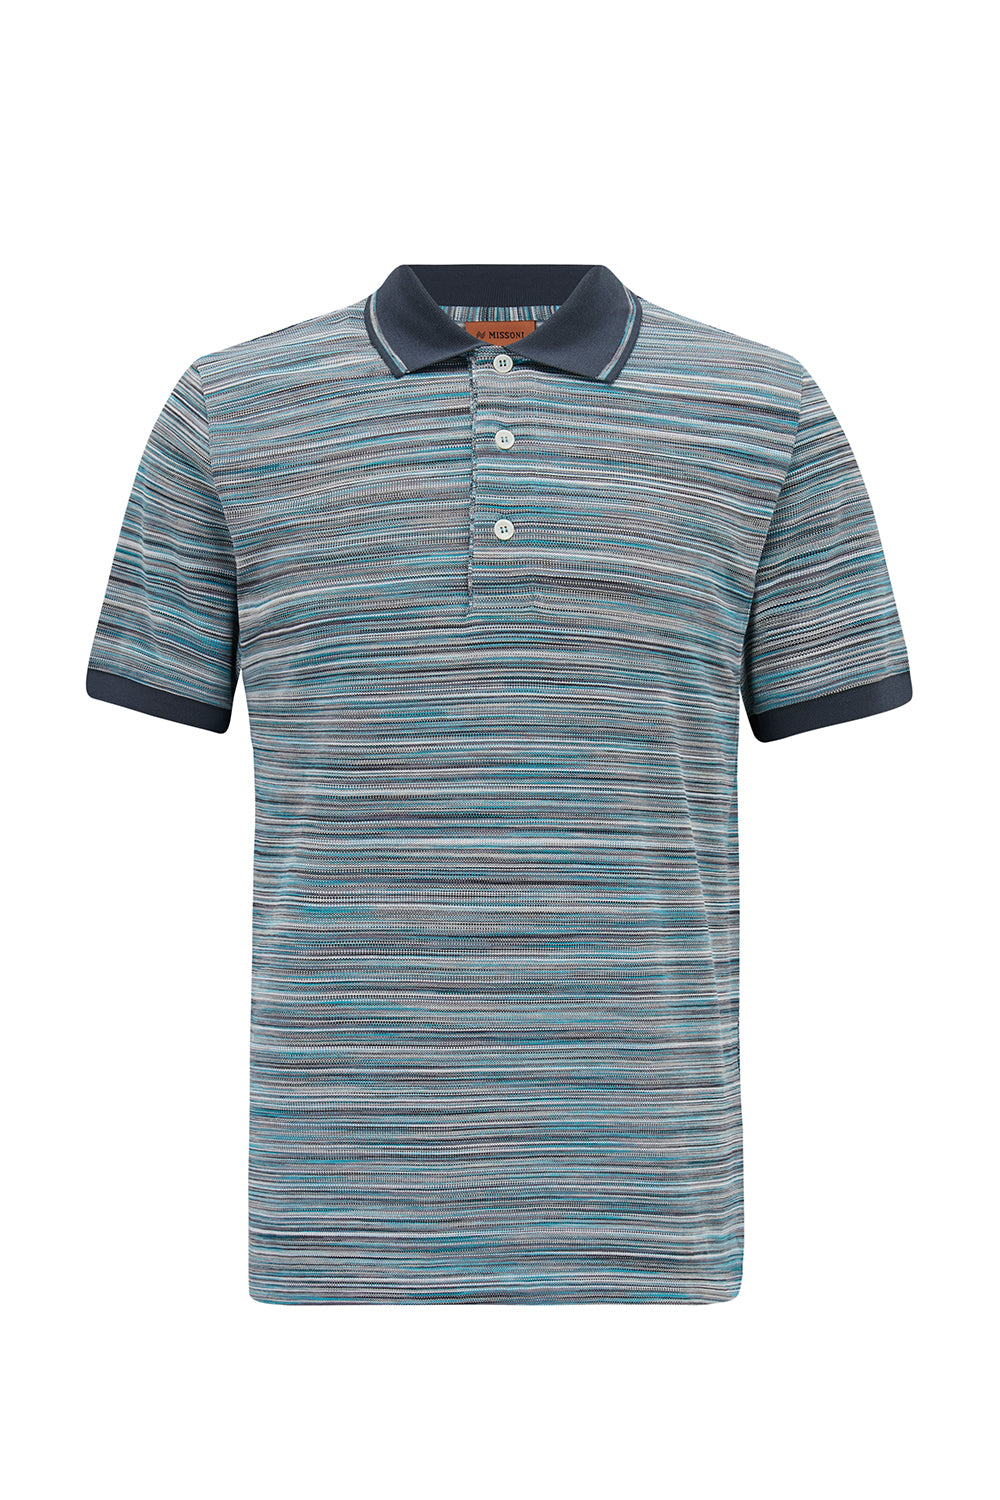 Missoni Men's Contrast Collar Striped Polo Shirt Blue - Front View